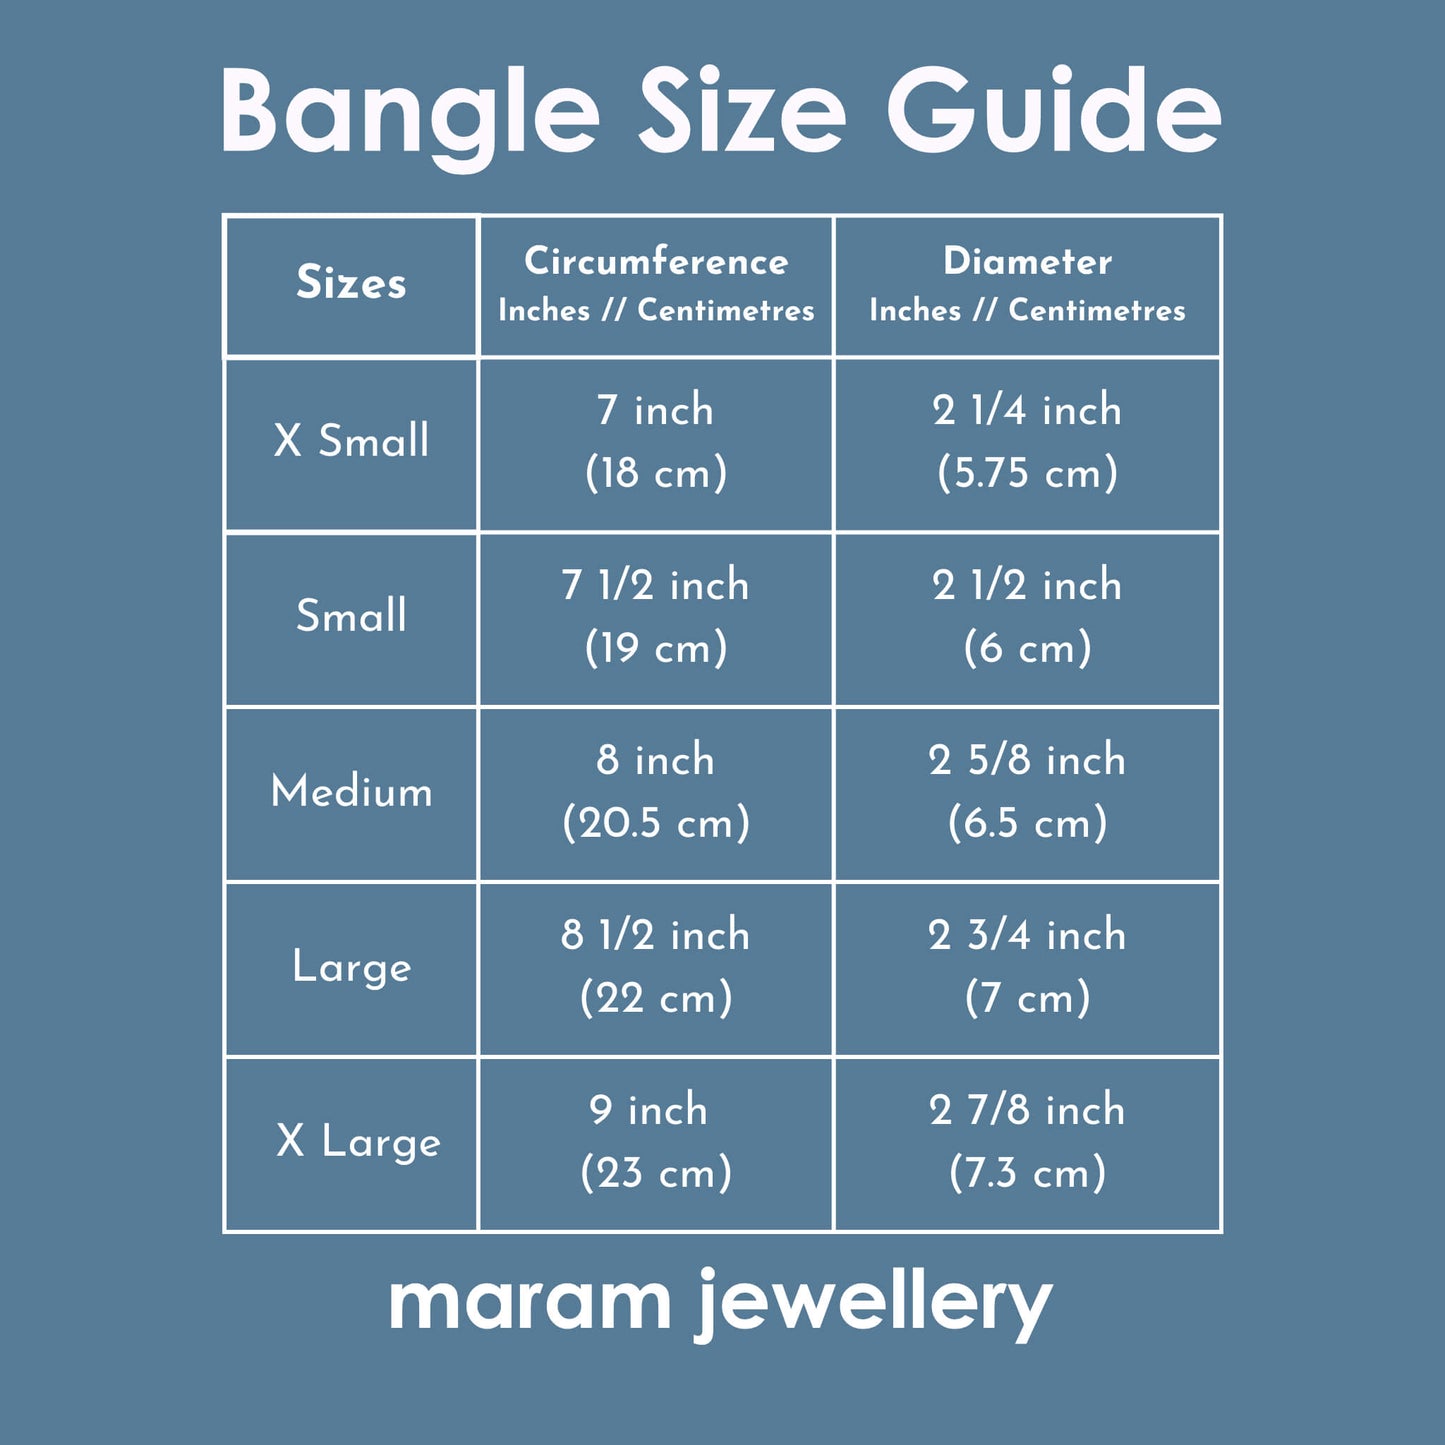 Bangle size infographic with size of maram jewellery bangles. In circumference: Small is 7 inch, Medium is 7.5 inch, Large is 8 inch and Extra large is 9 inch.